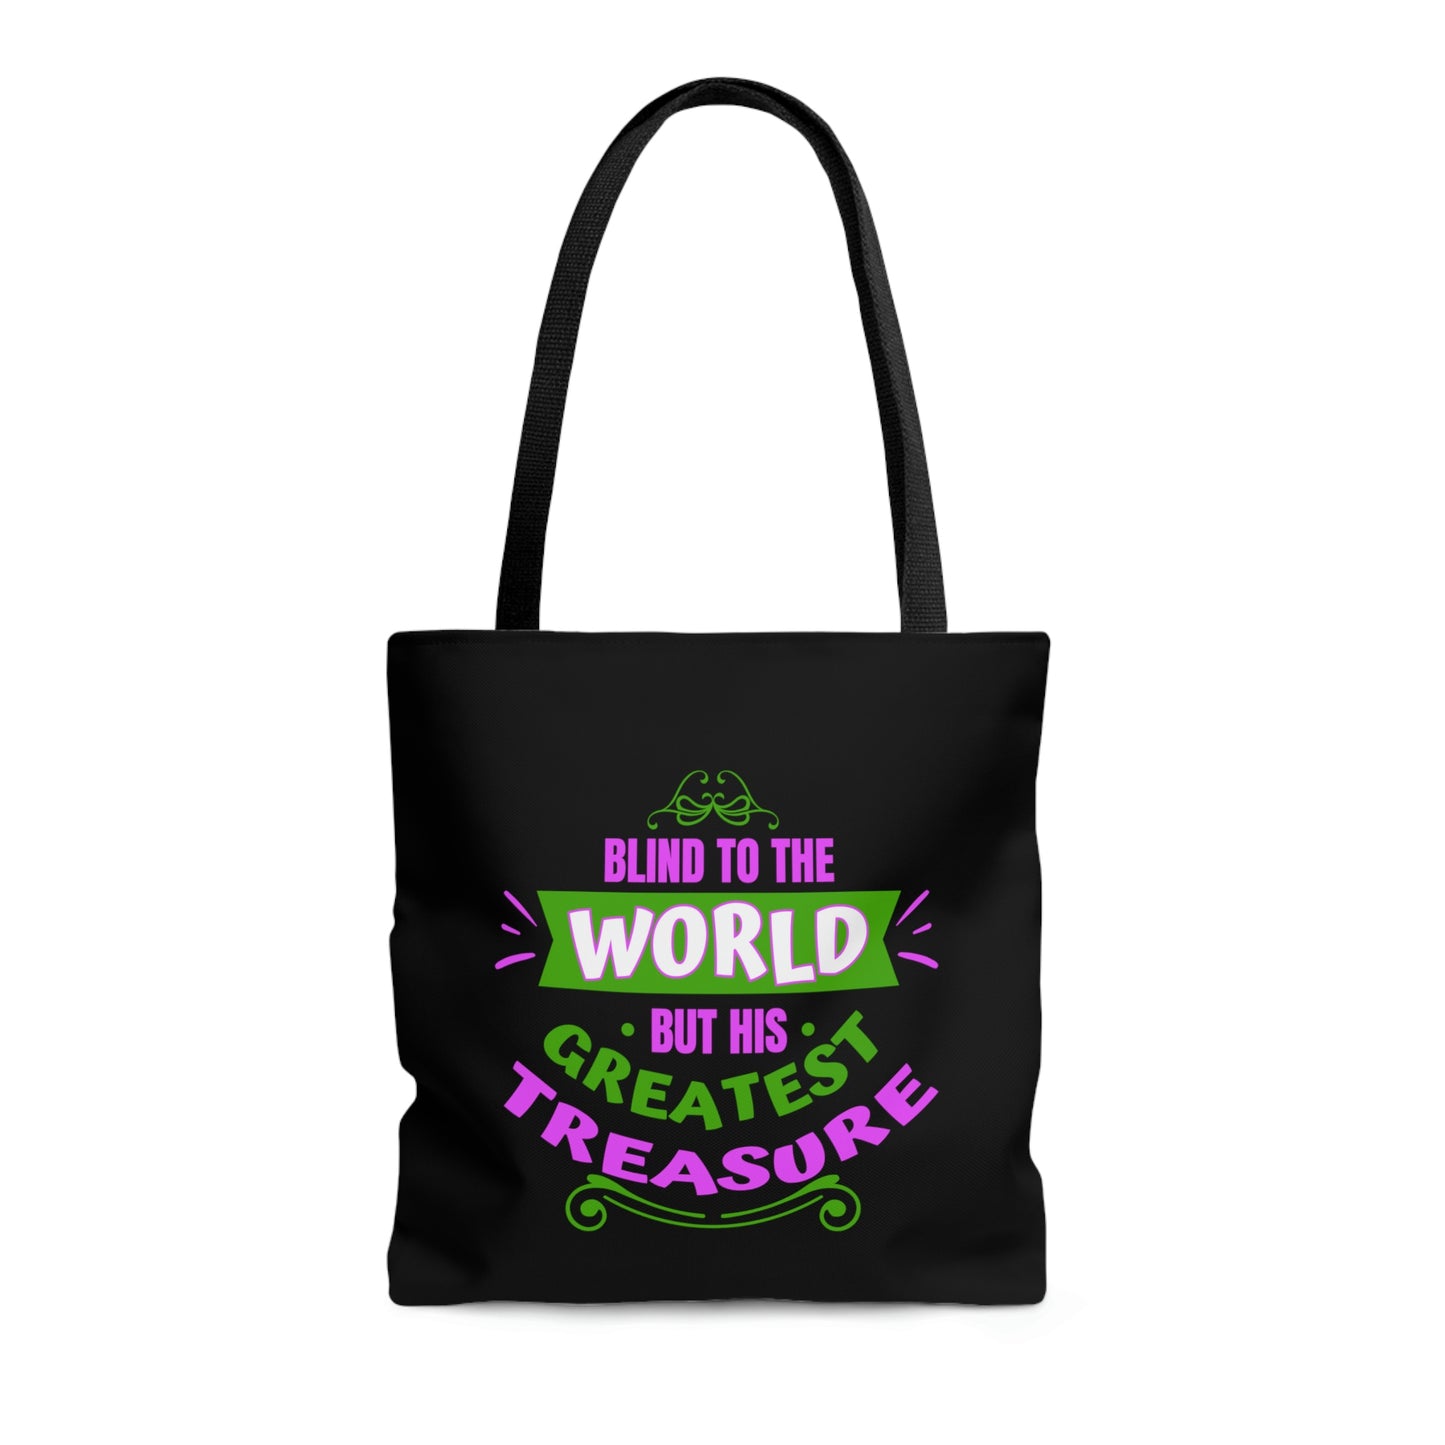 Blind To The World But His Greatest Treasure Tote Bag